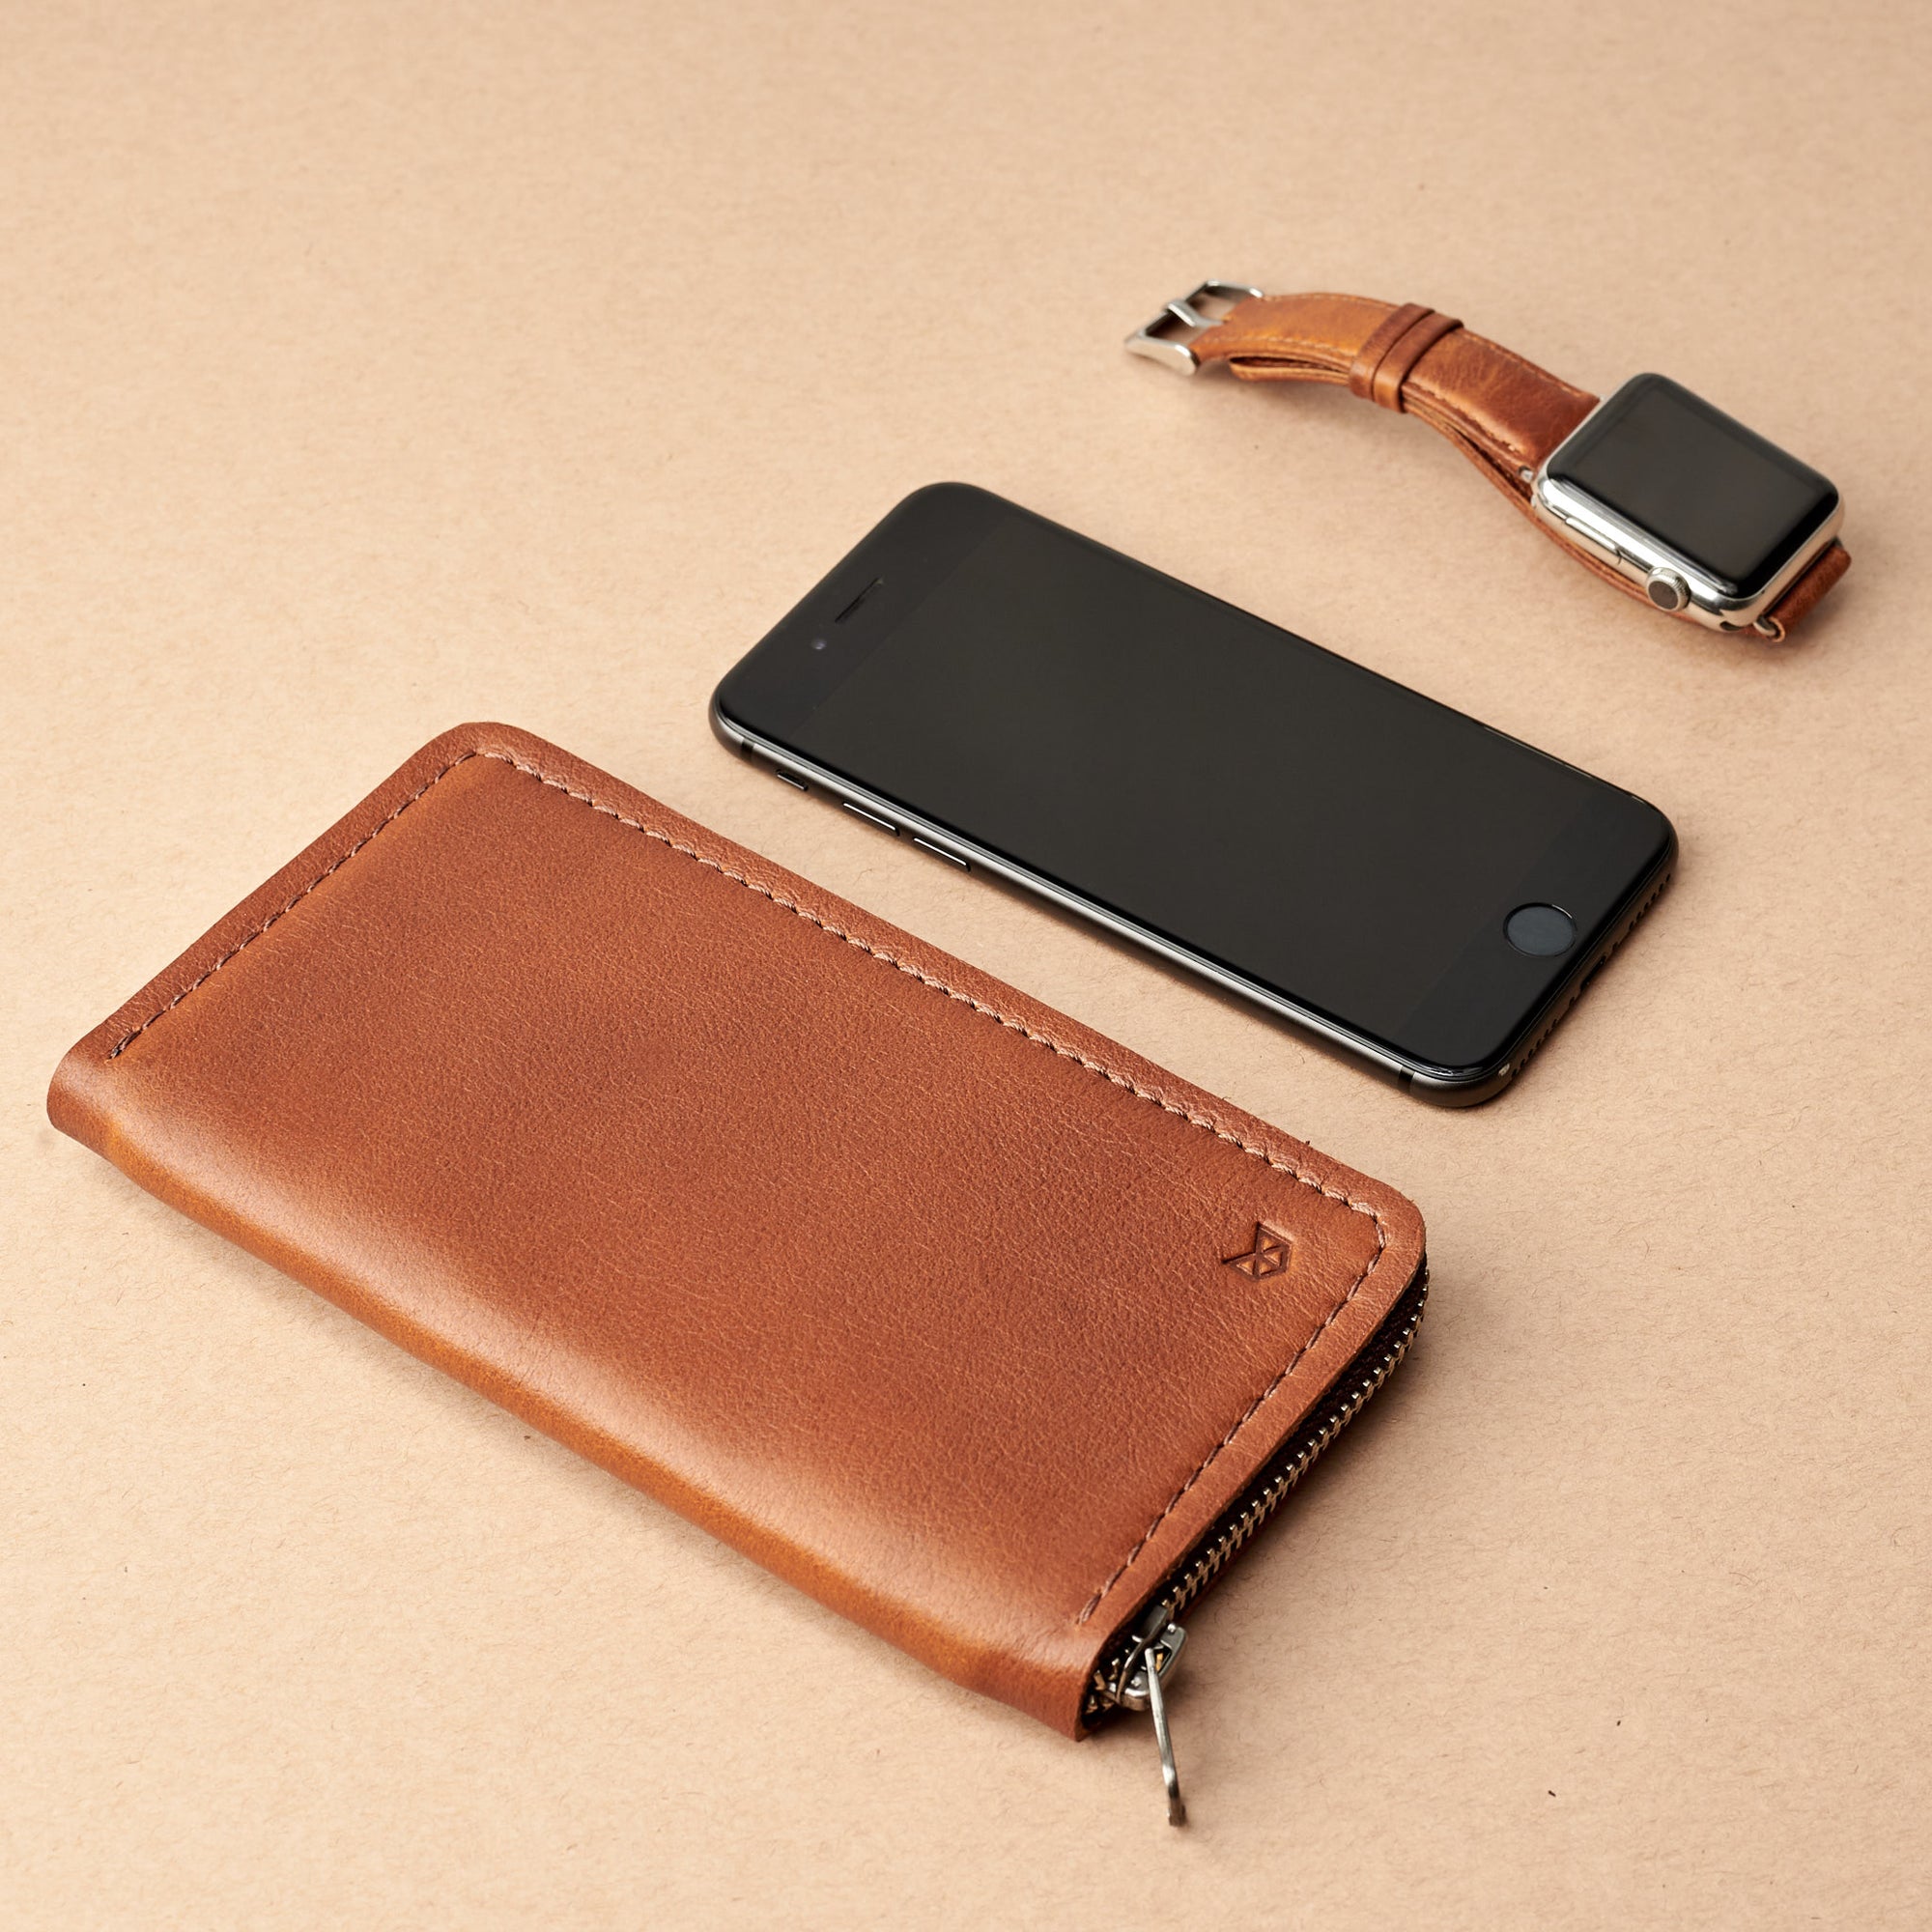 Style. Carefully handcrafted brown leather case stand wallet for new Google Pixel 2 and 2 XL. Men's Pixel sleeve with card holder. Crafted by Capra Leather.